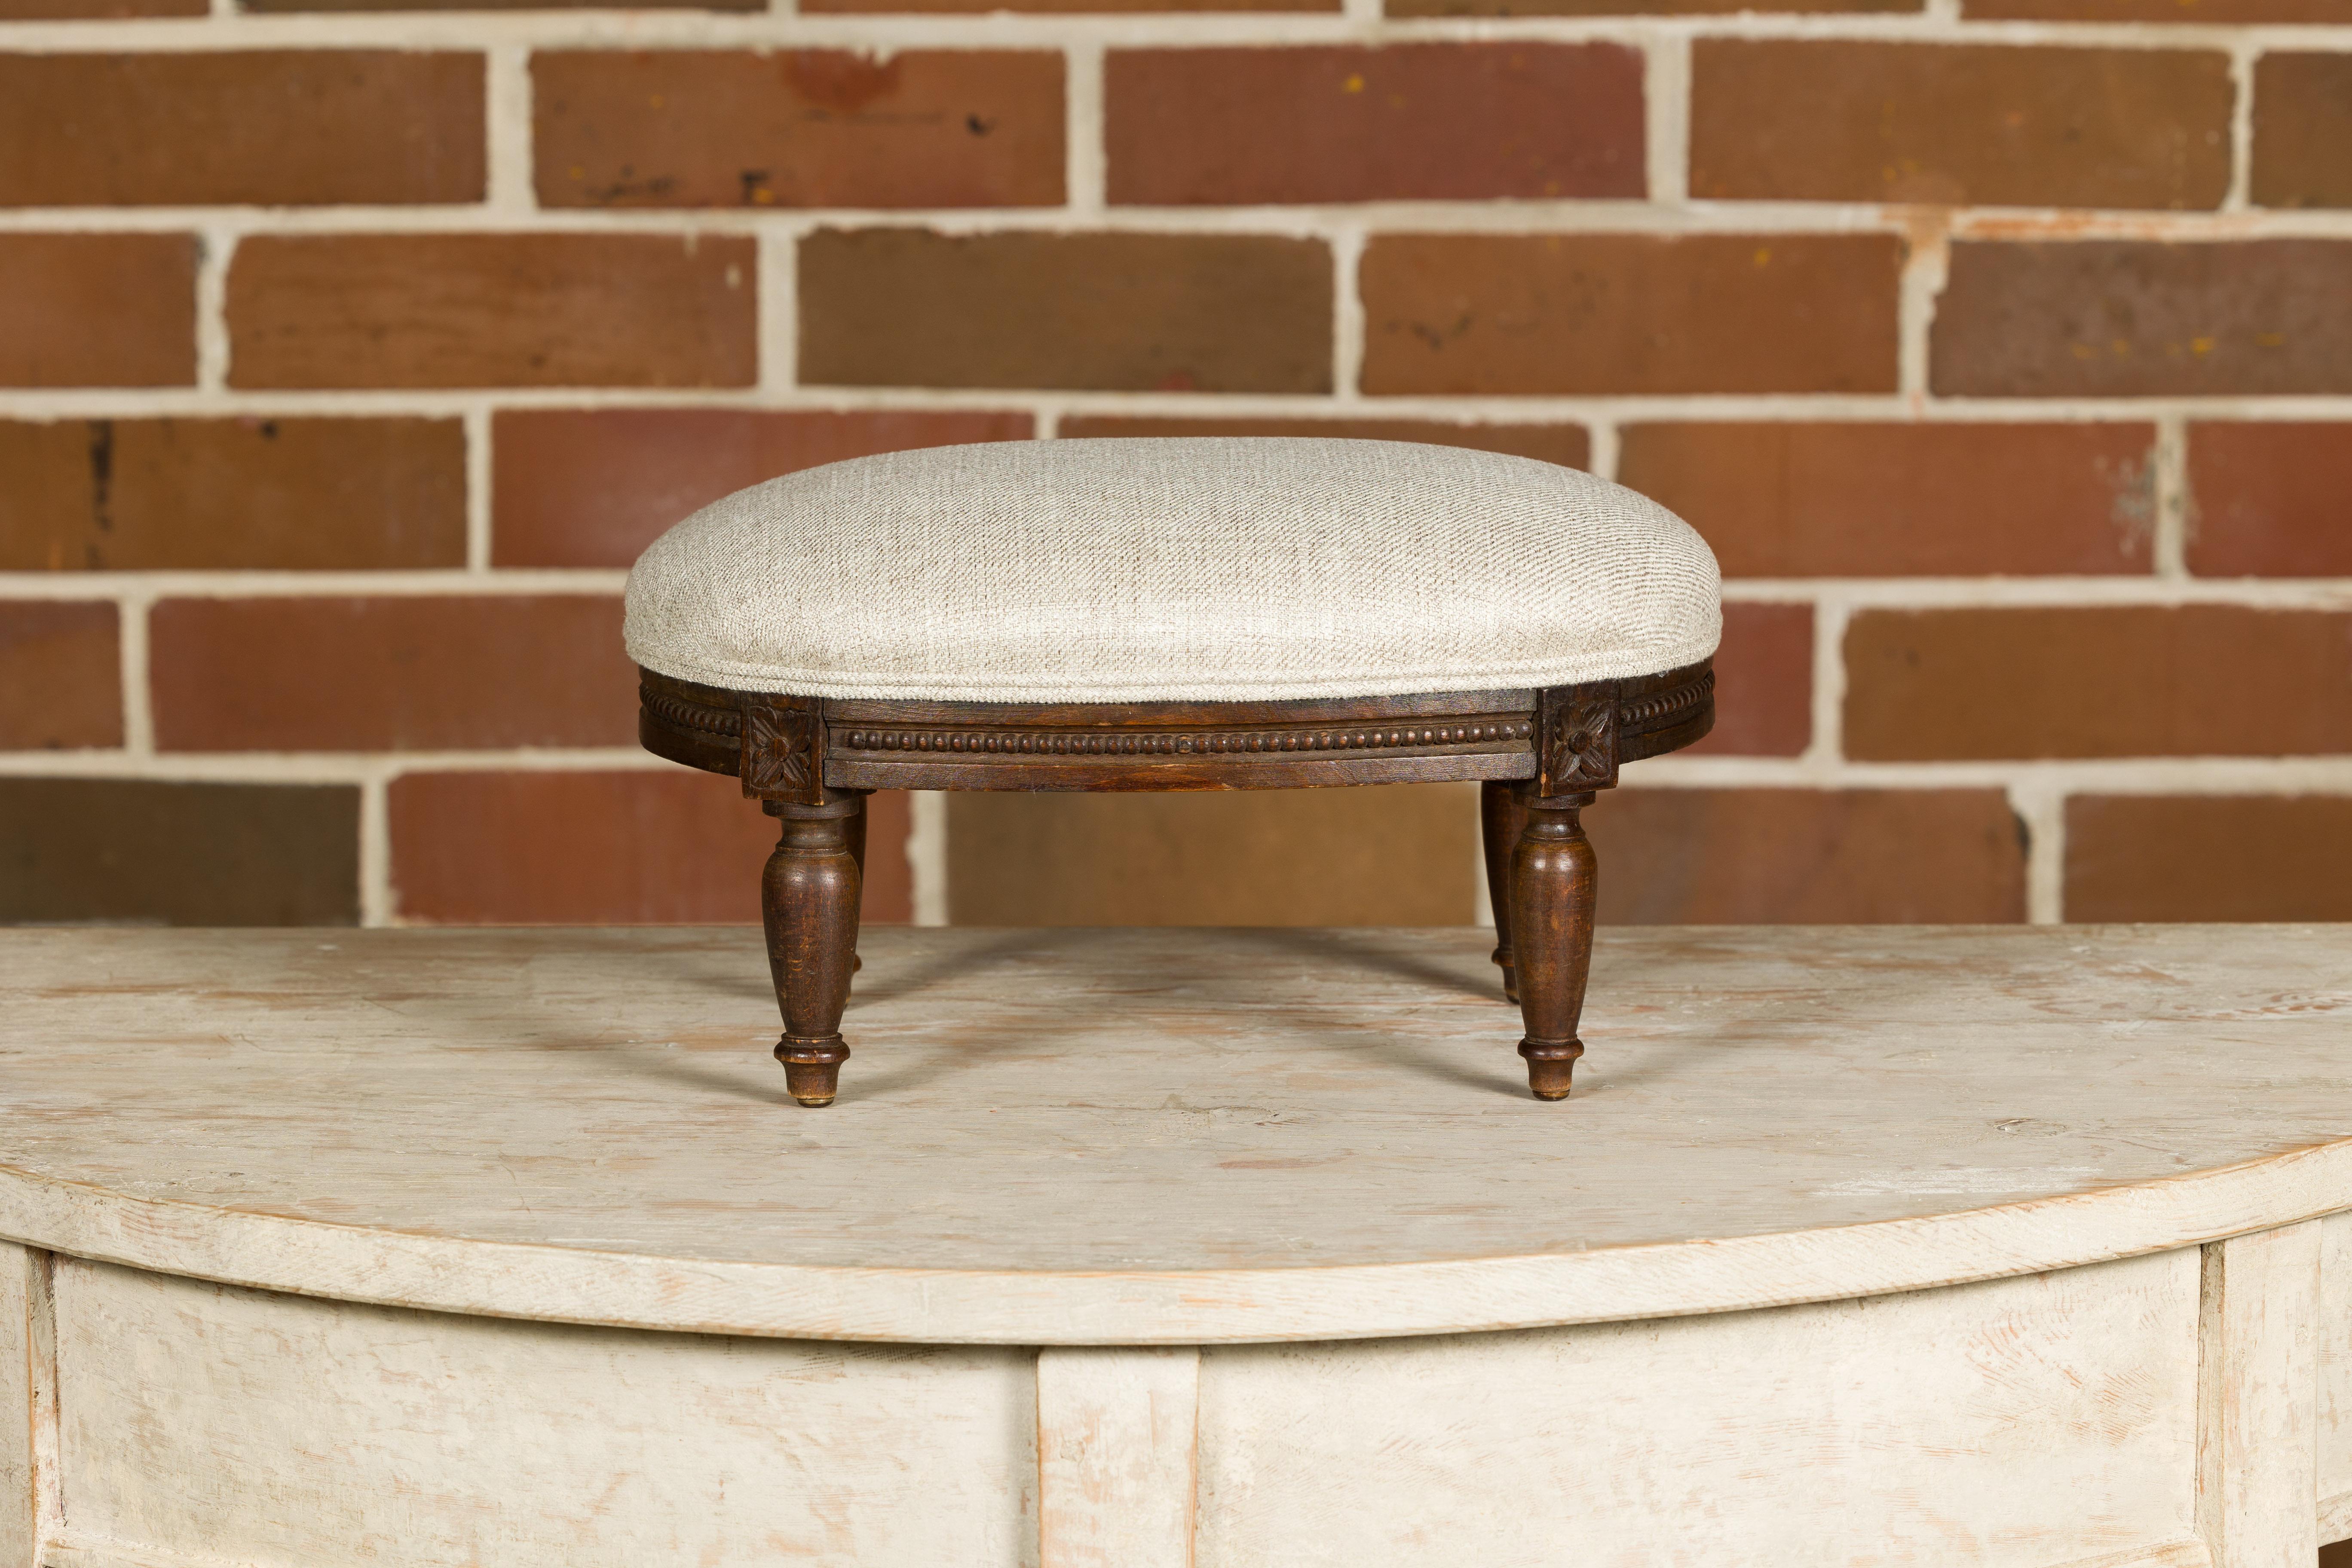 A French Louis XVI style wooden footstool from circa 1900 with carved rosettes, beads and turned legs. This French Louis XVI style wooden footstool, dating back to the early 20th century, exudes timeless elegance and craftsmanship. Its design is a